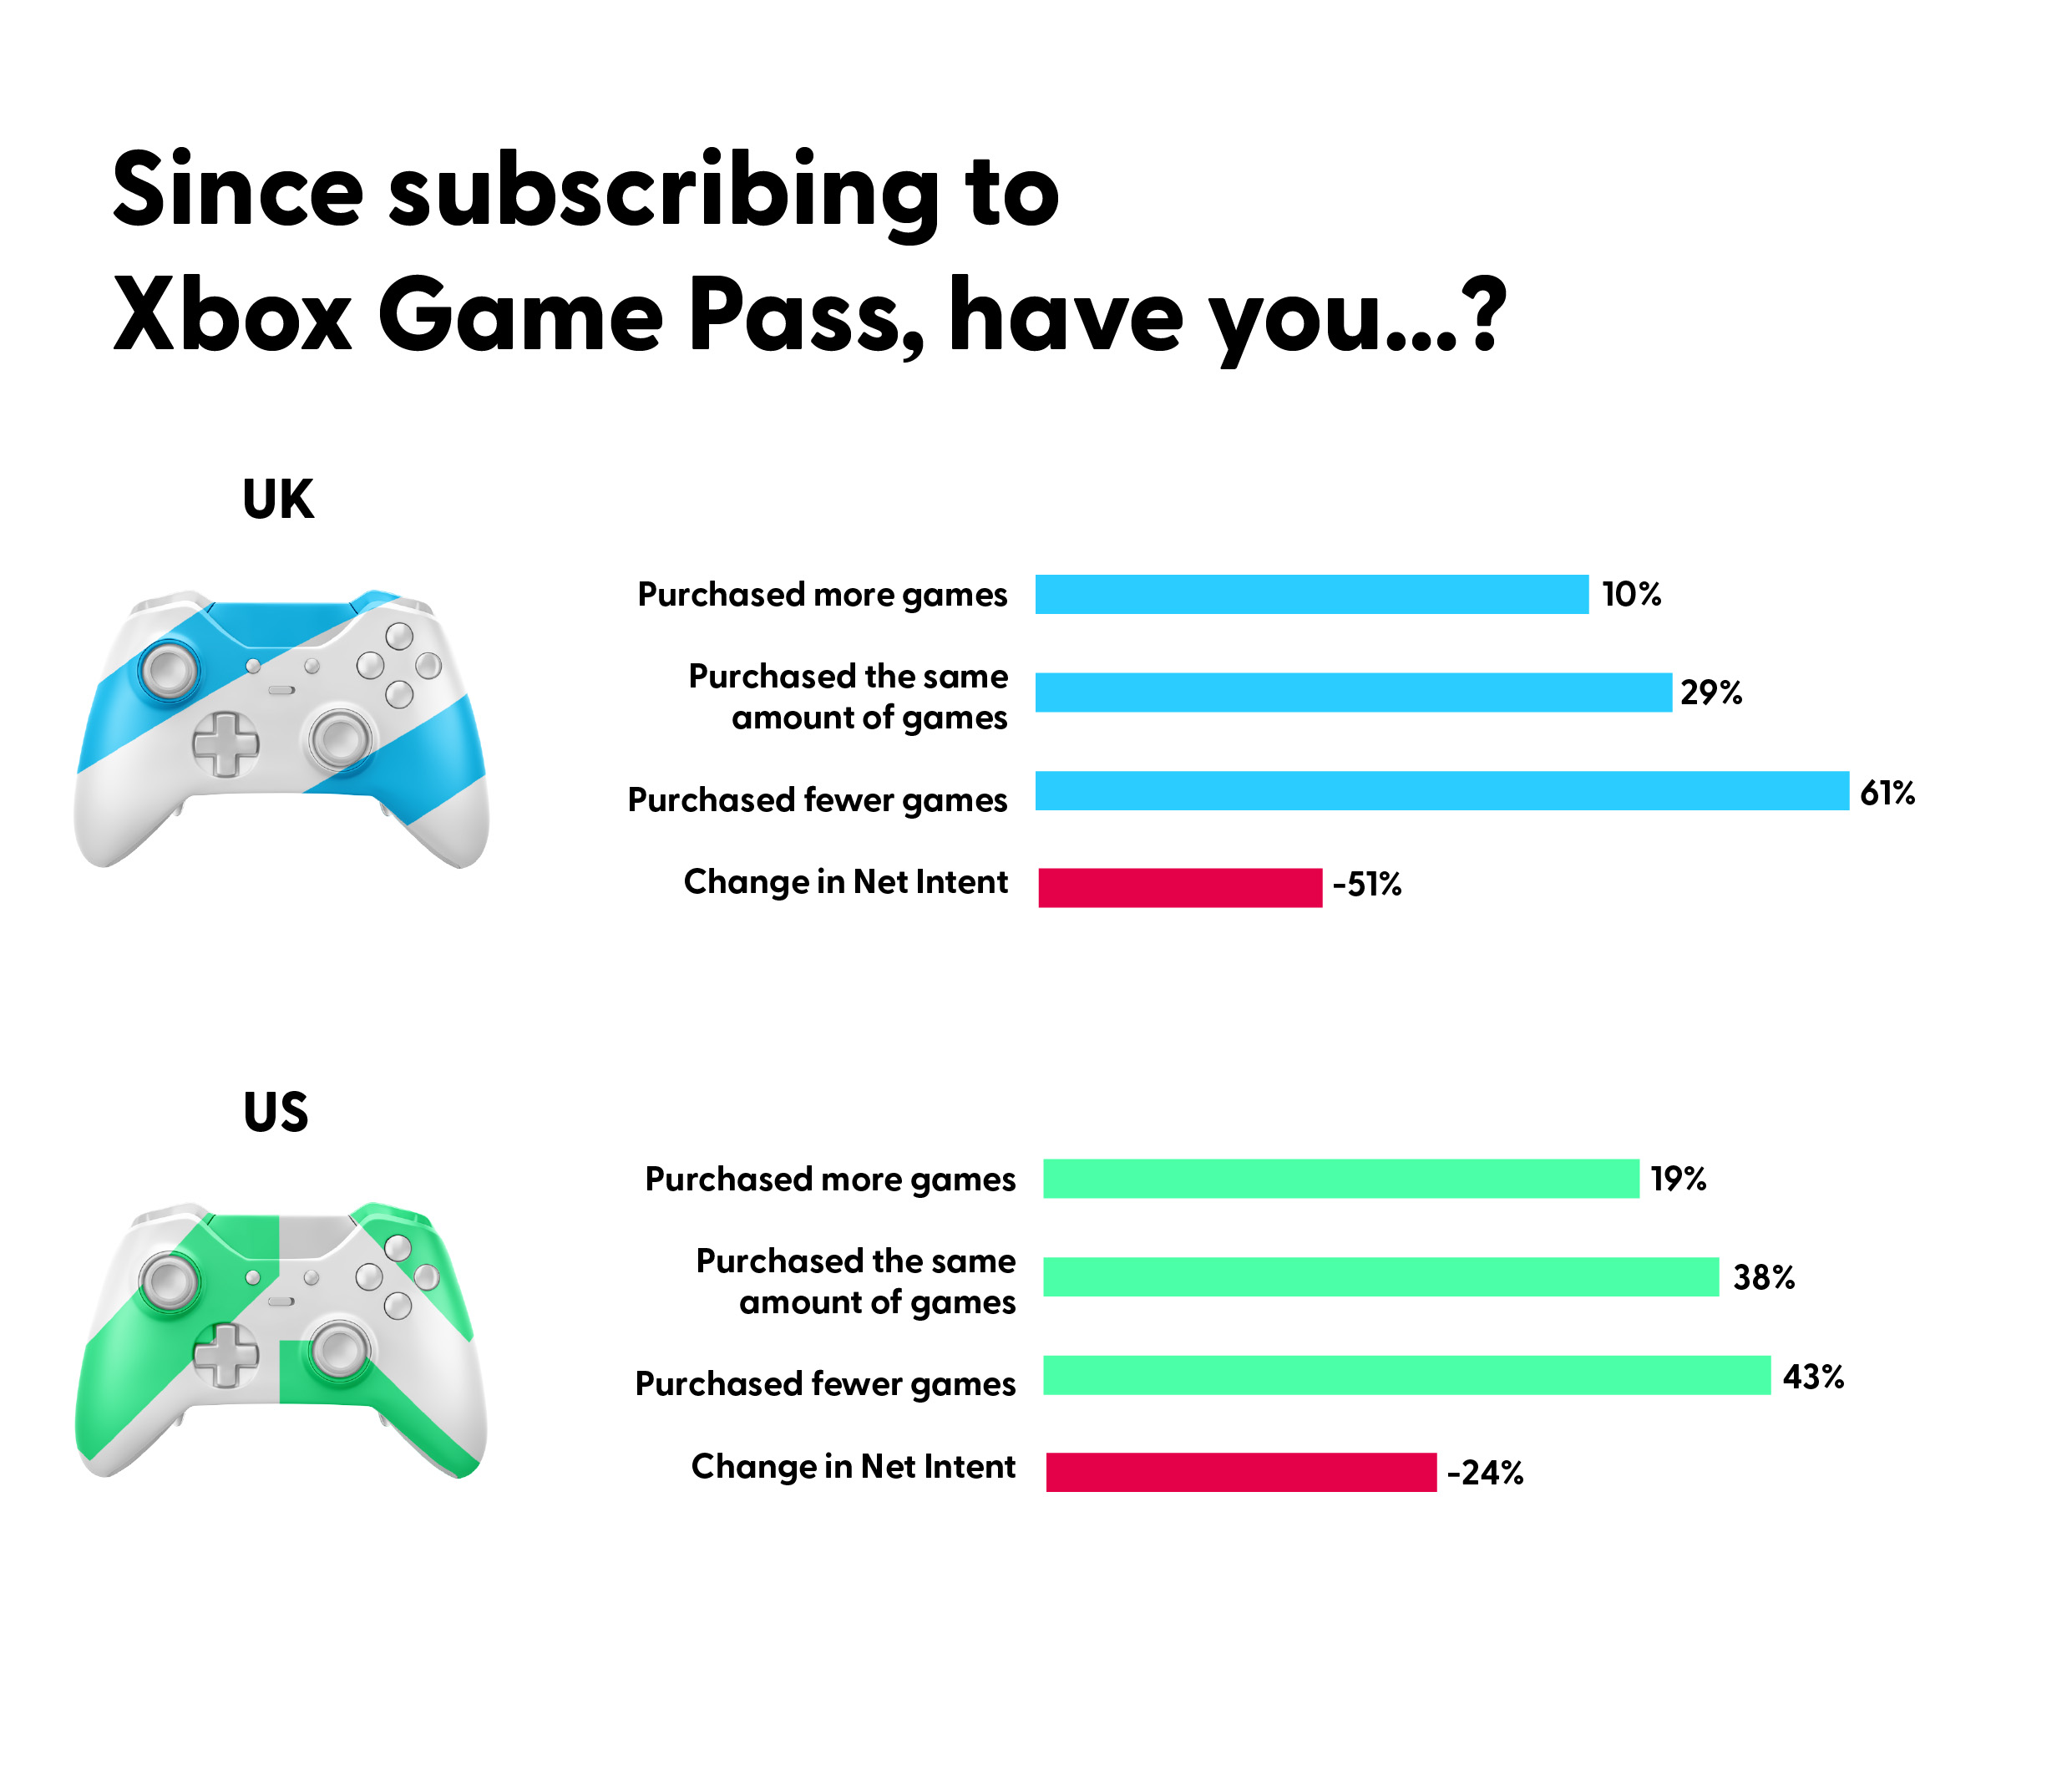 Are XBox Game Pass subscribers buying fewer games?